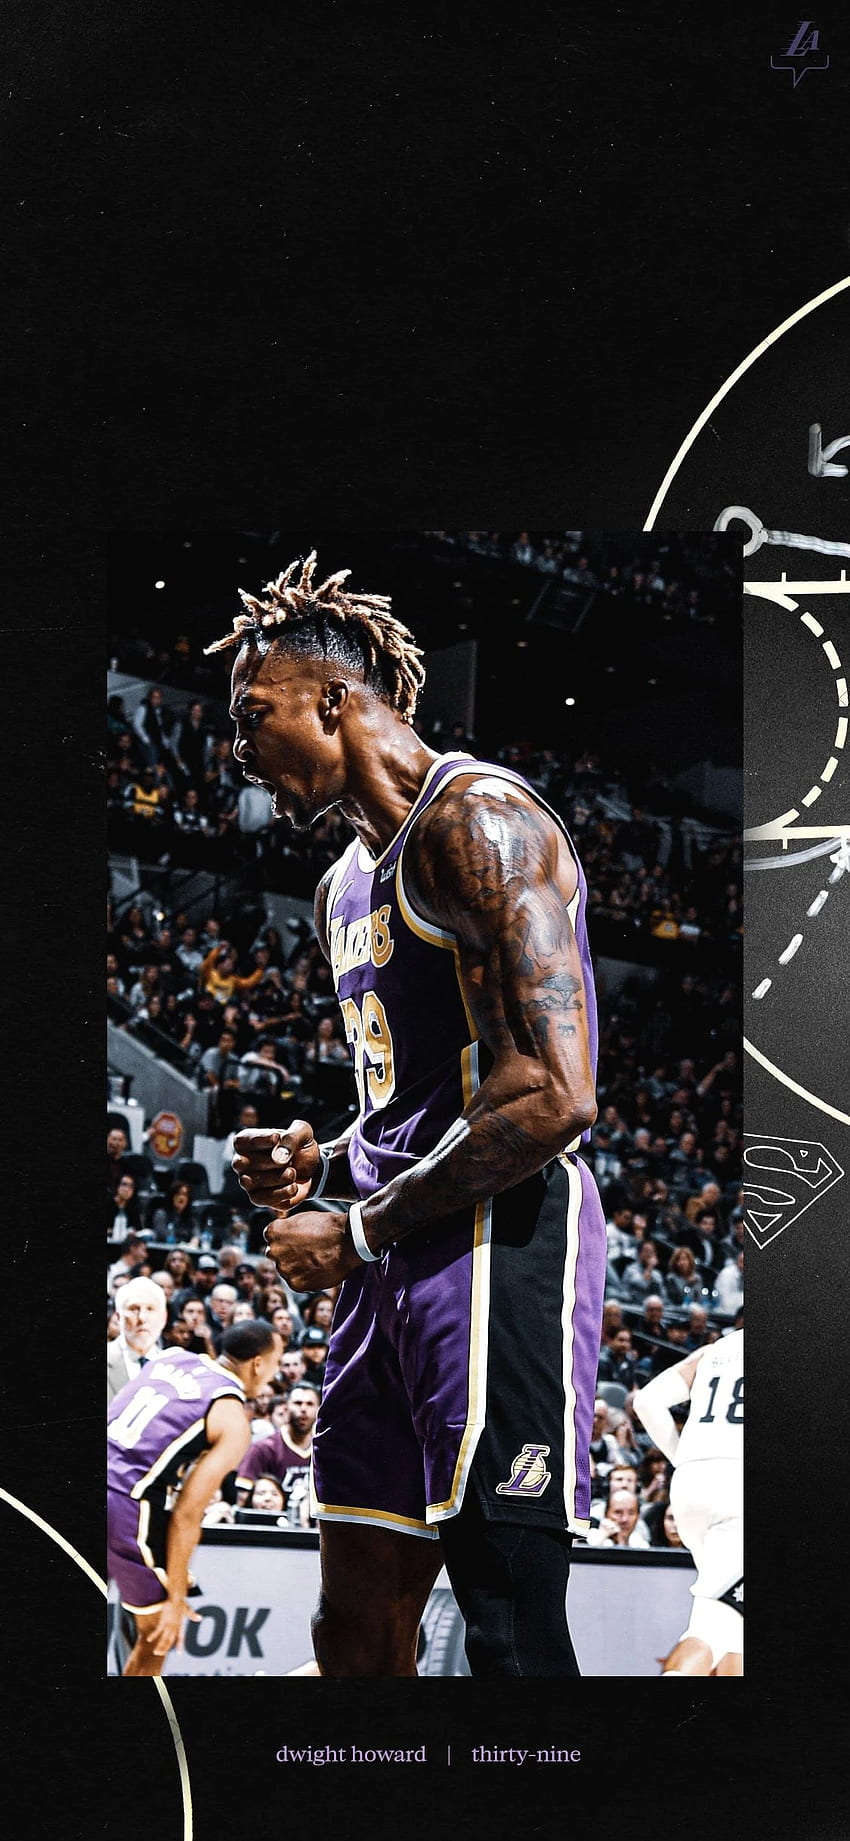 Lakers Wallpapers and Infographics, Los Angeles Lakers